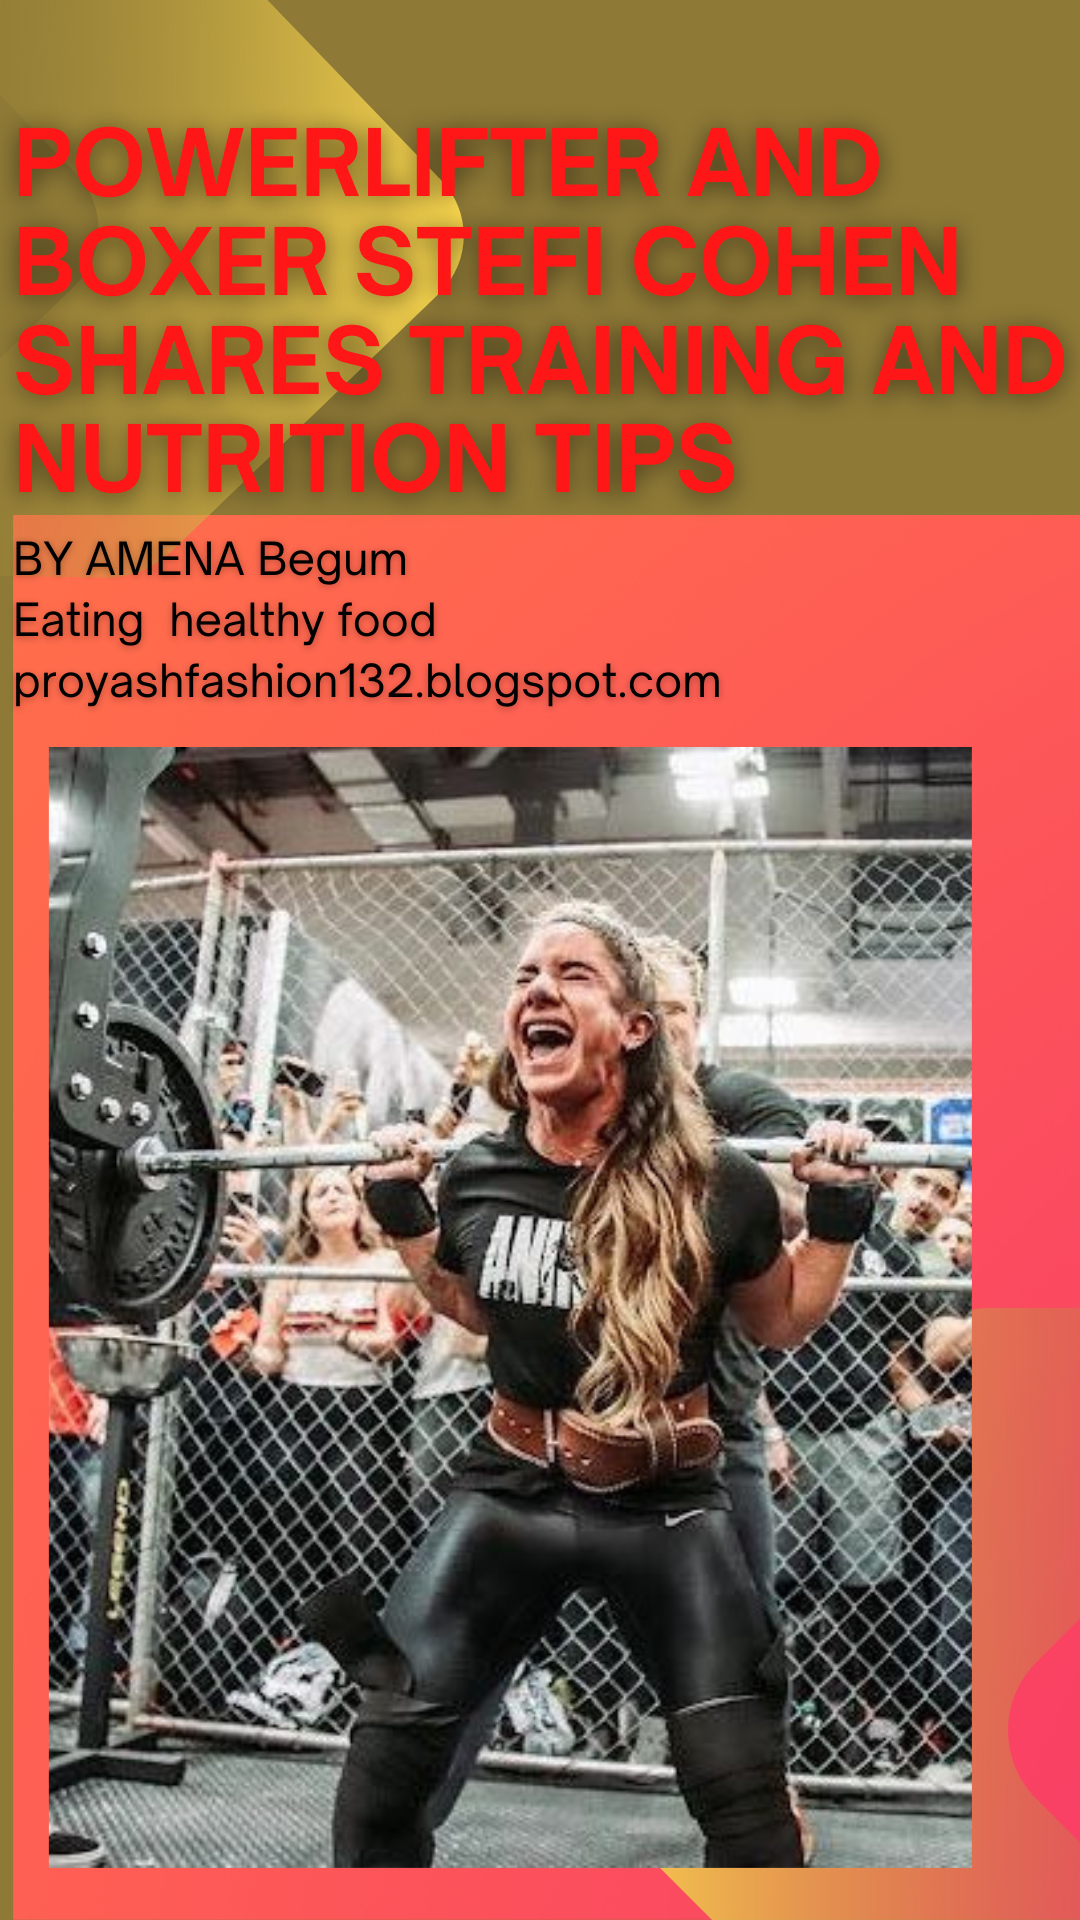 Powerlifter And Boxer Stefi Cohen Shares Training And Nutrition Tips